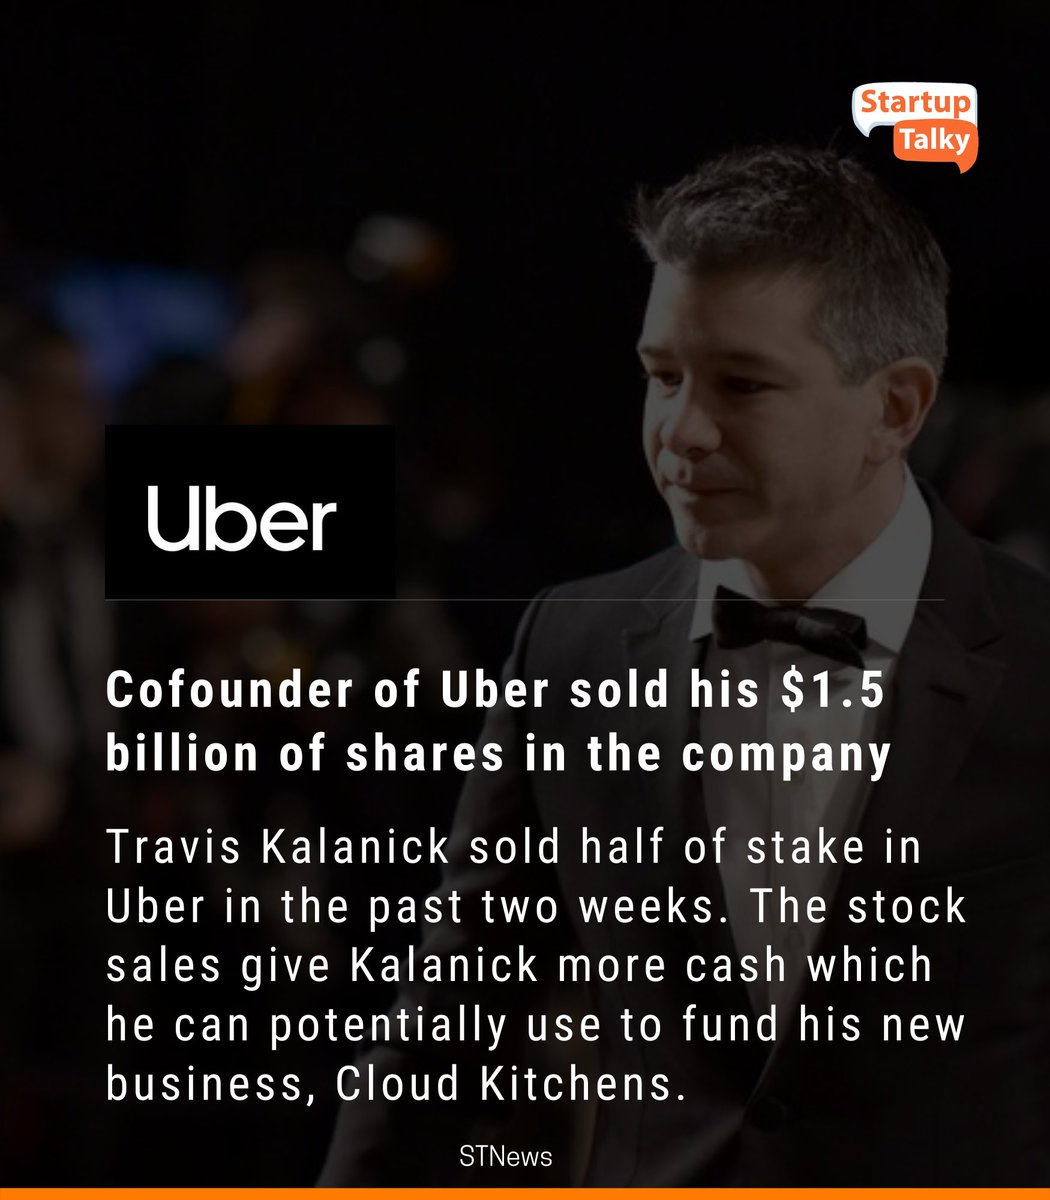 Travis has been busy cashing out his stake in Uber for a long time. 
#STnews #uber #startupnews #ubernews #traviskalanick #news